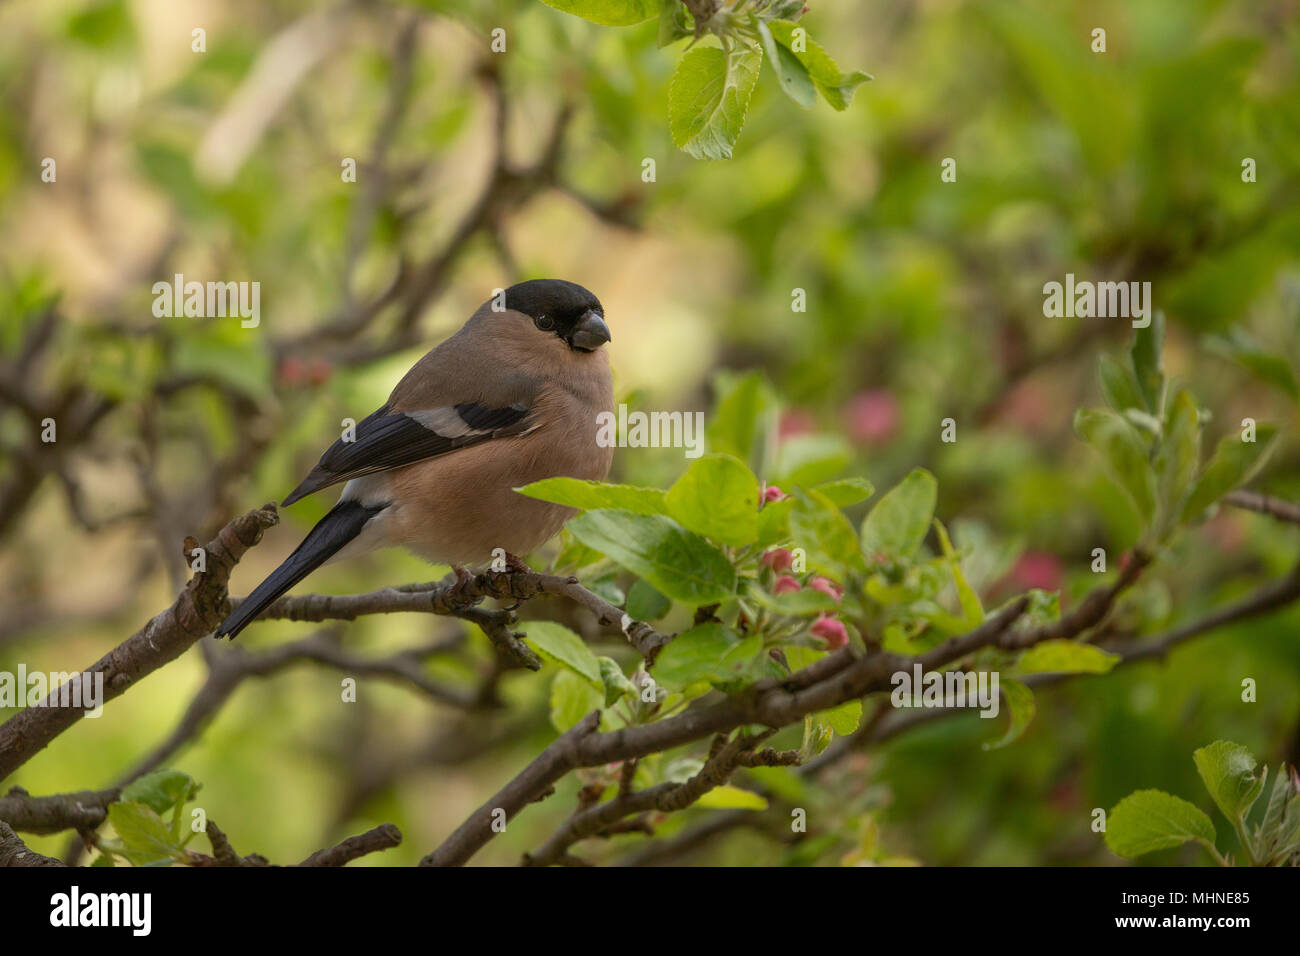 Female bullfinch perched on a branch. Stock Photo